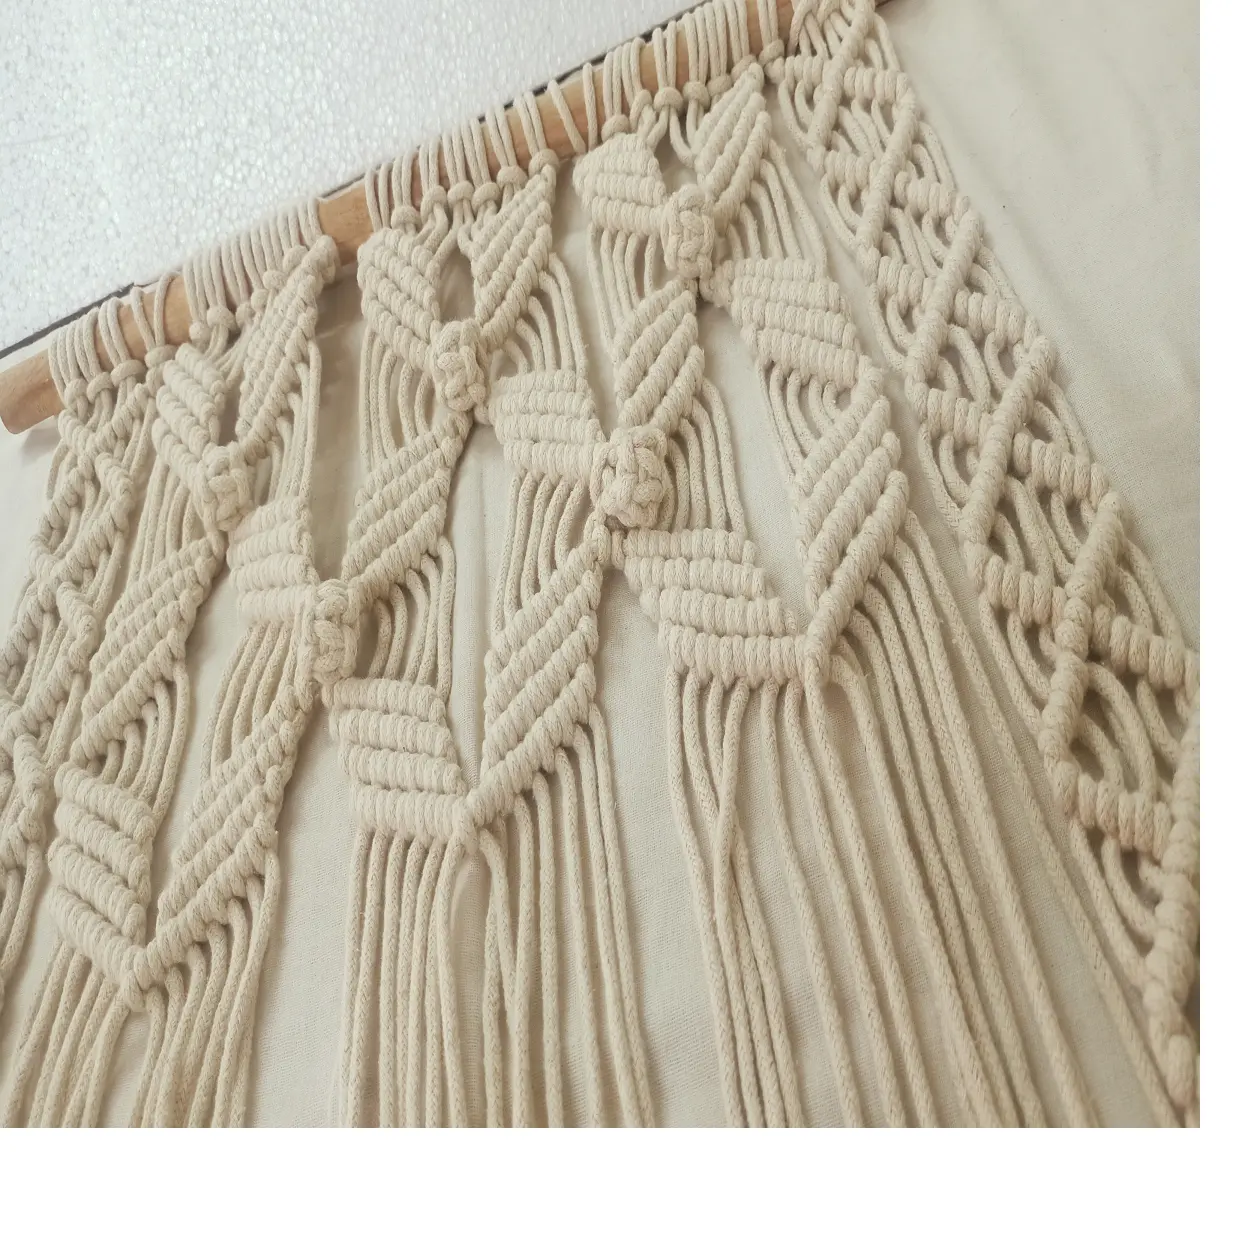 custom made wooden cotton macrame cord wall and door hangers available in natural colors ideal for home decoration stores